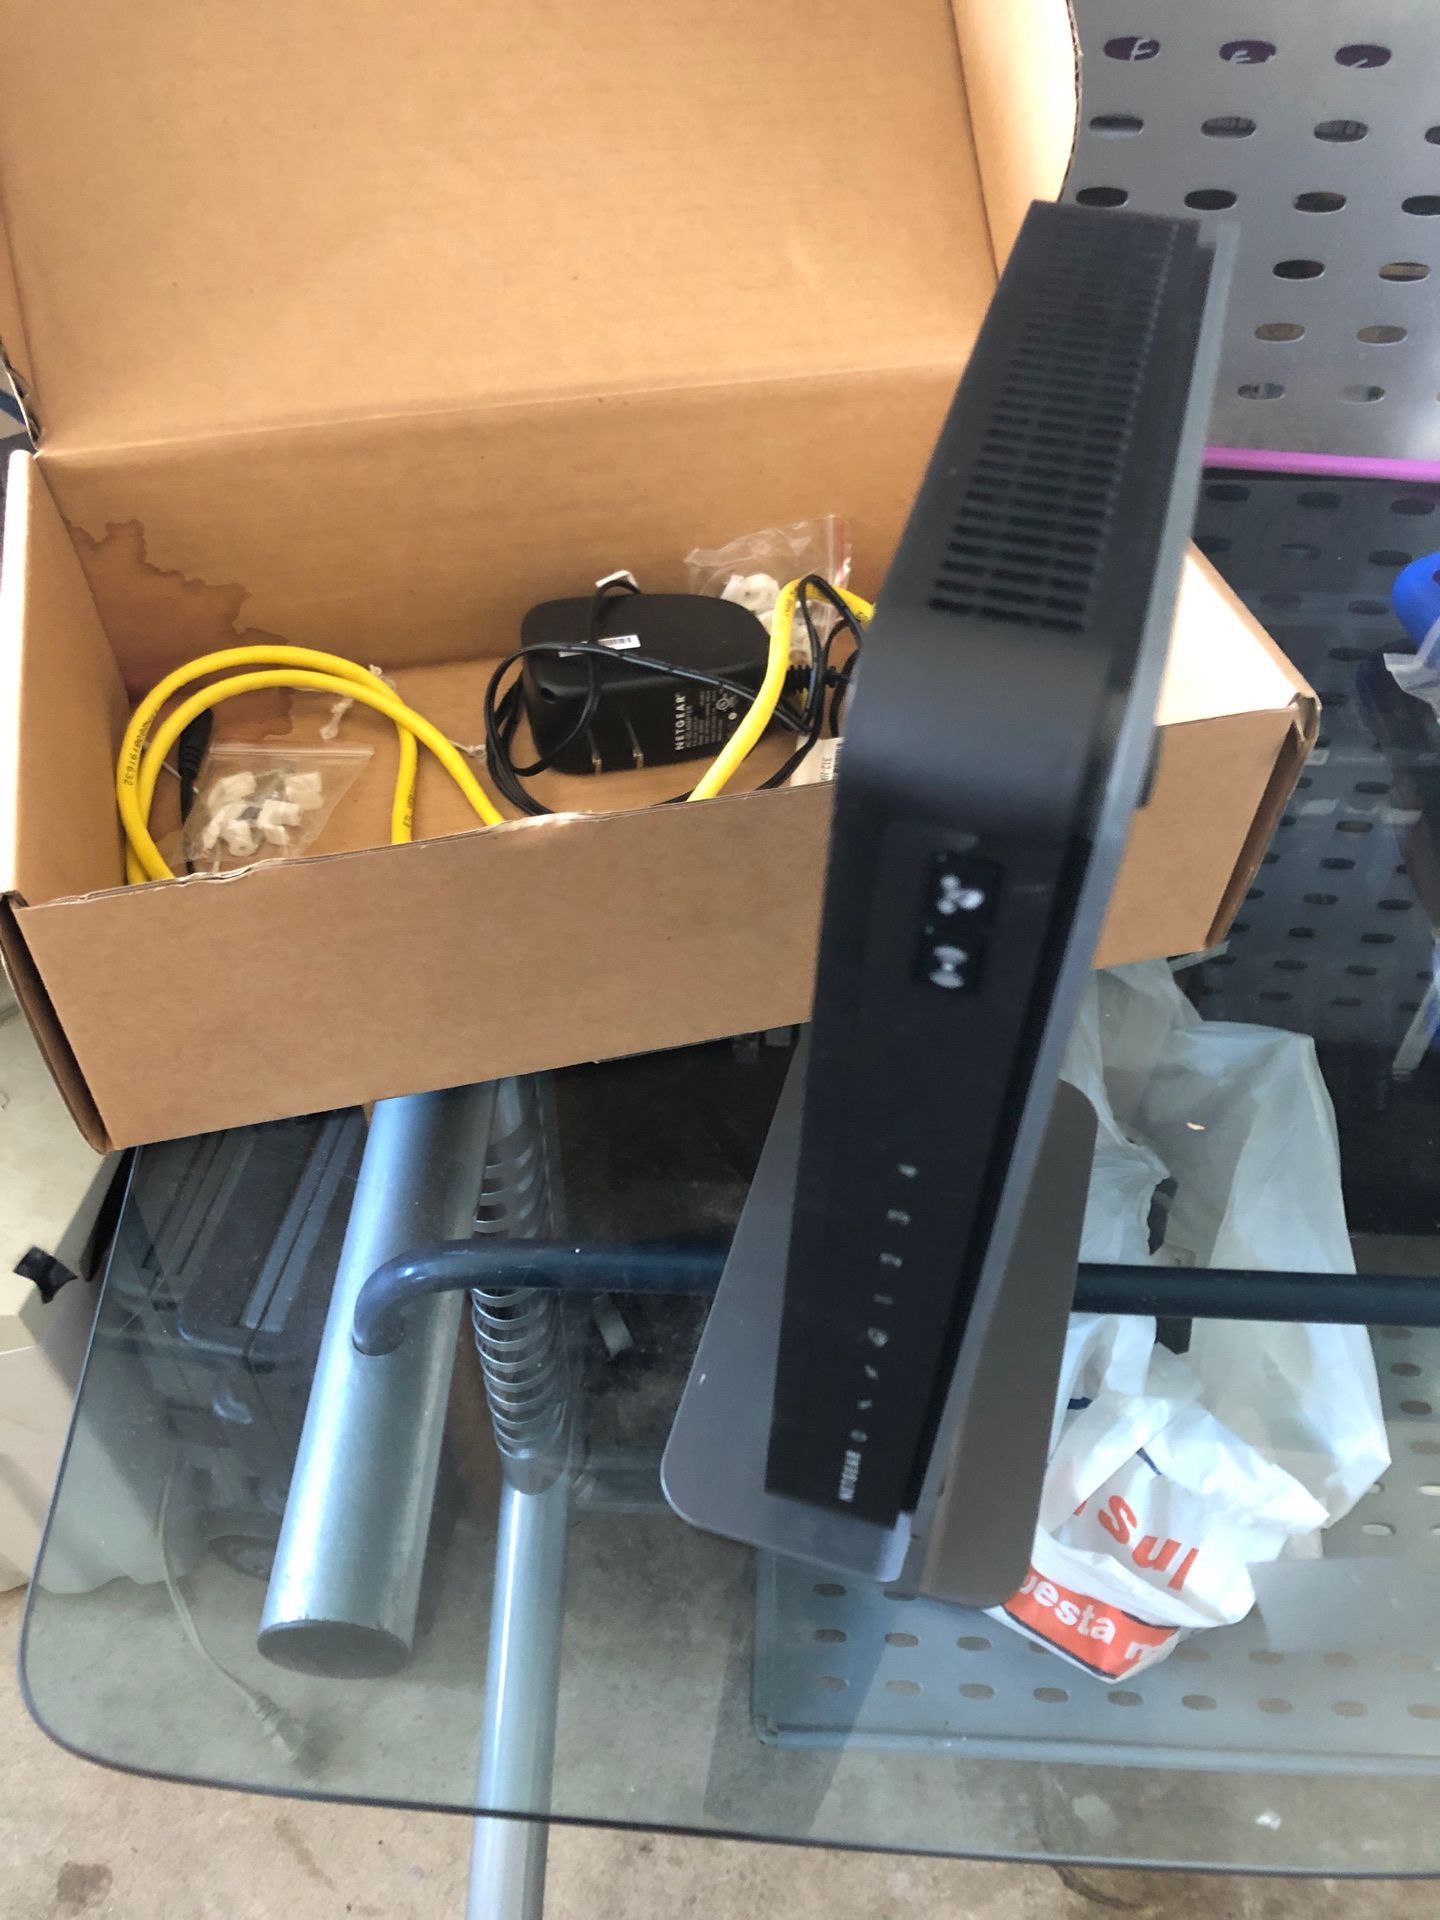 Netgear cable modem router with WiFi